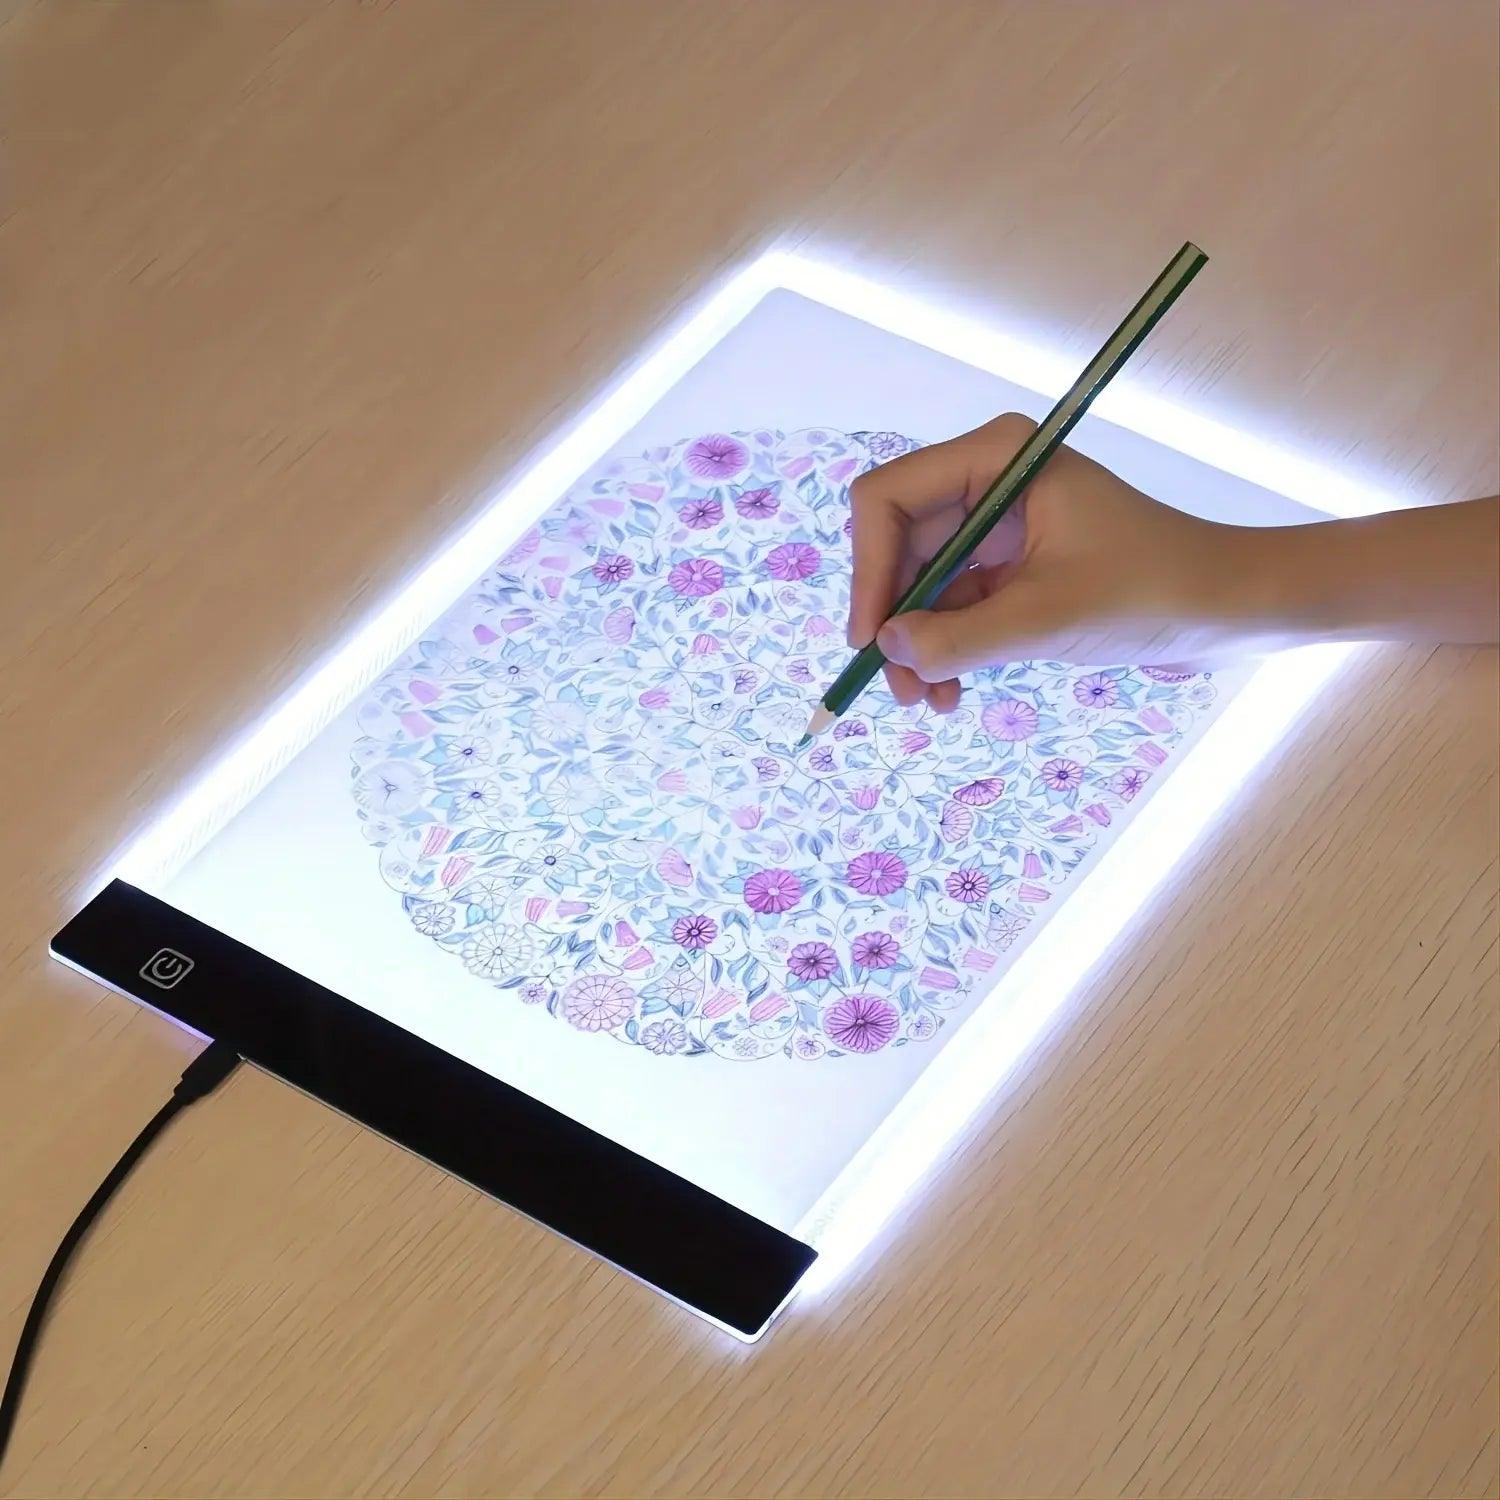 Dimmable LED Drawing Pad: Creative Kids' Gift - ACO Marketplace